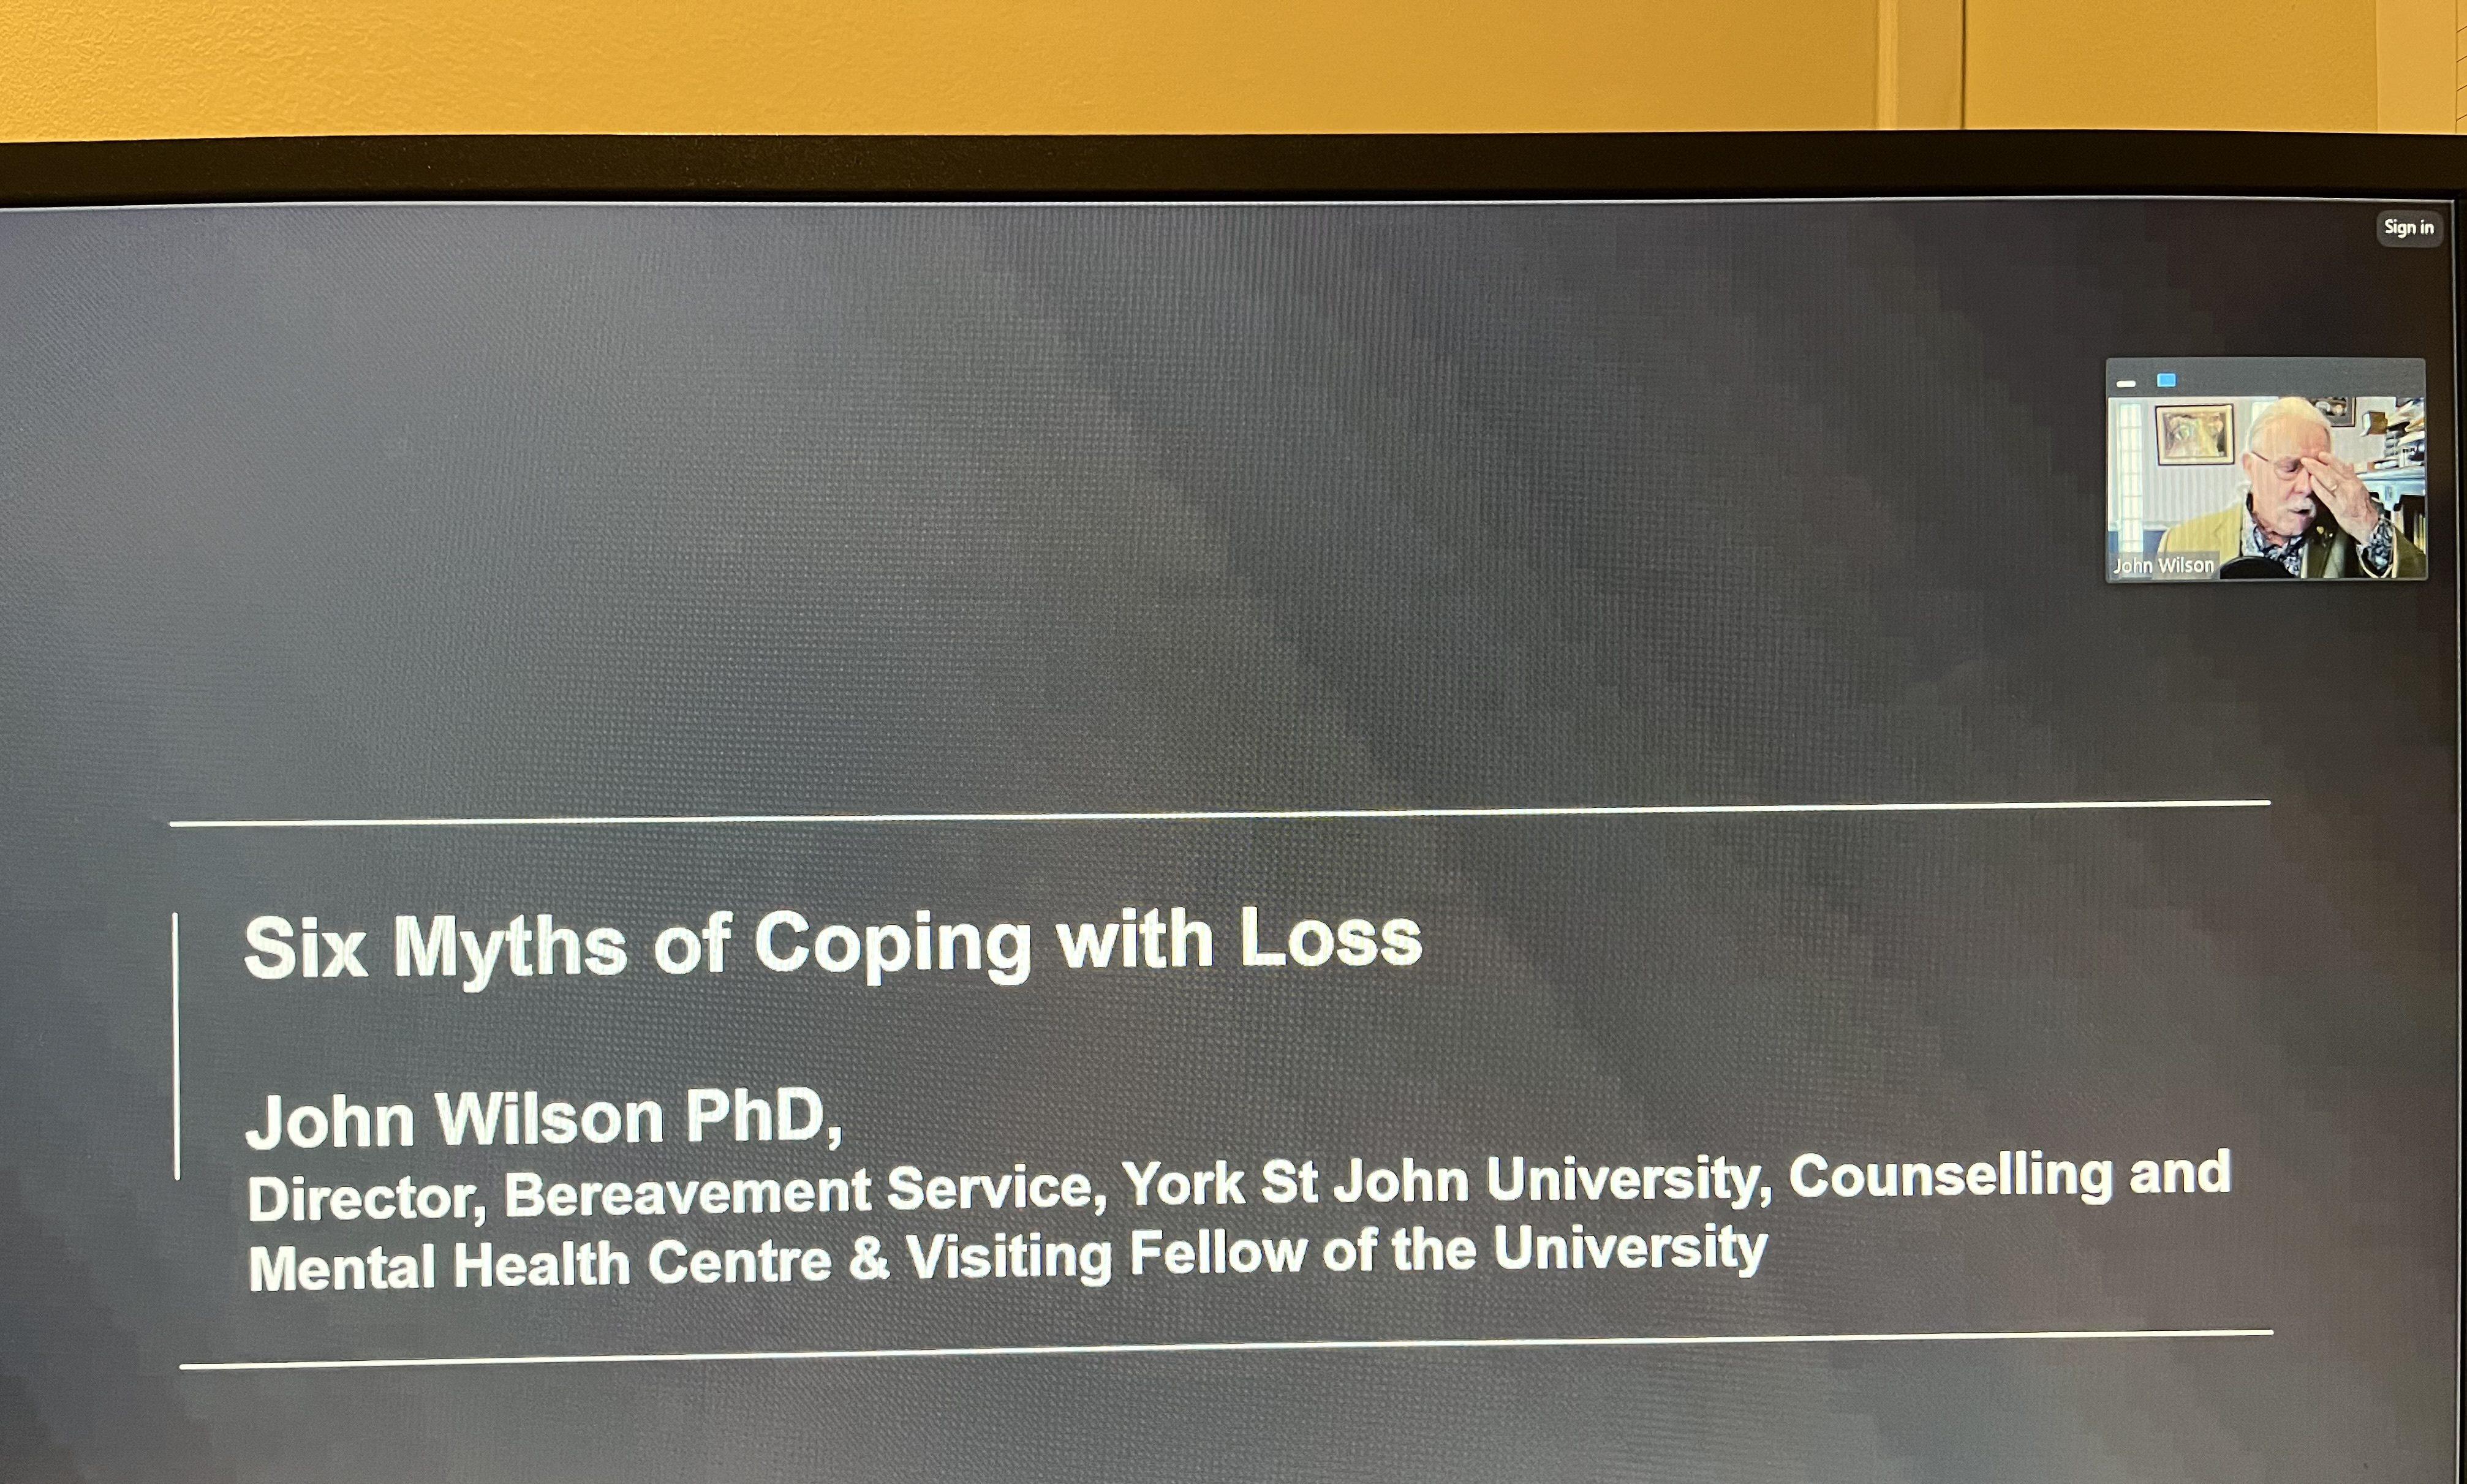 Much Loved webinar : Six myths of coping with loss